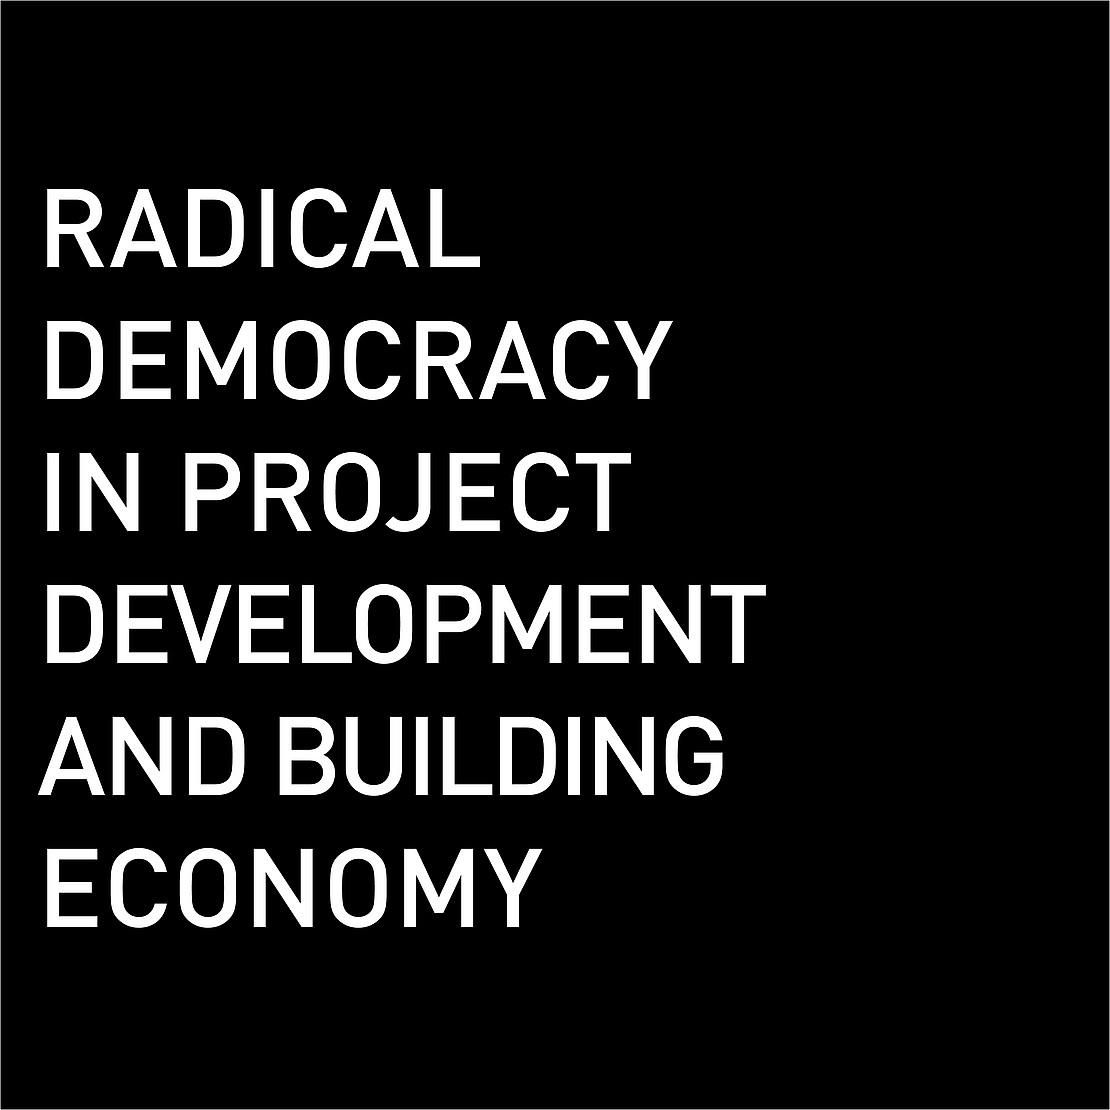 RADICAL DEMOCRACY IN PROJECT DEVELOPMENT AND BUILDING ECONOMY